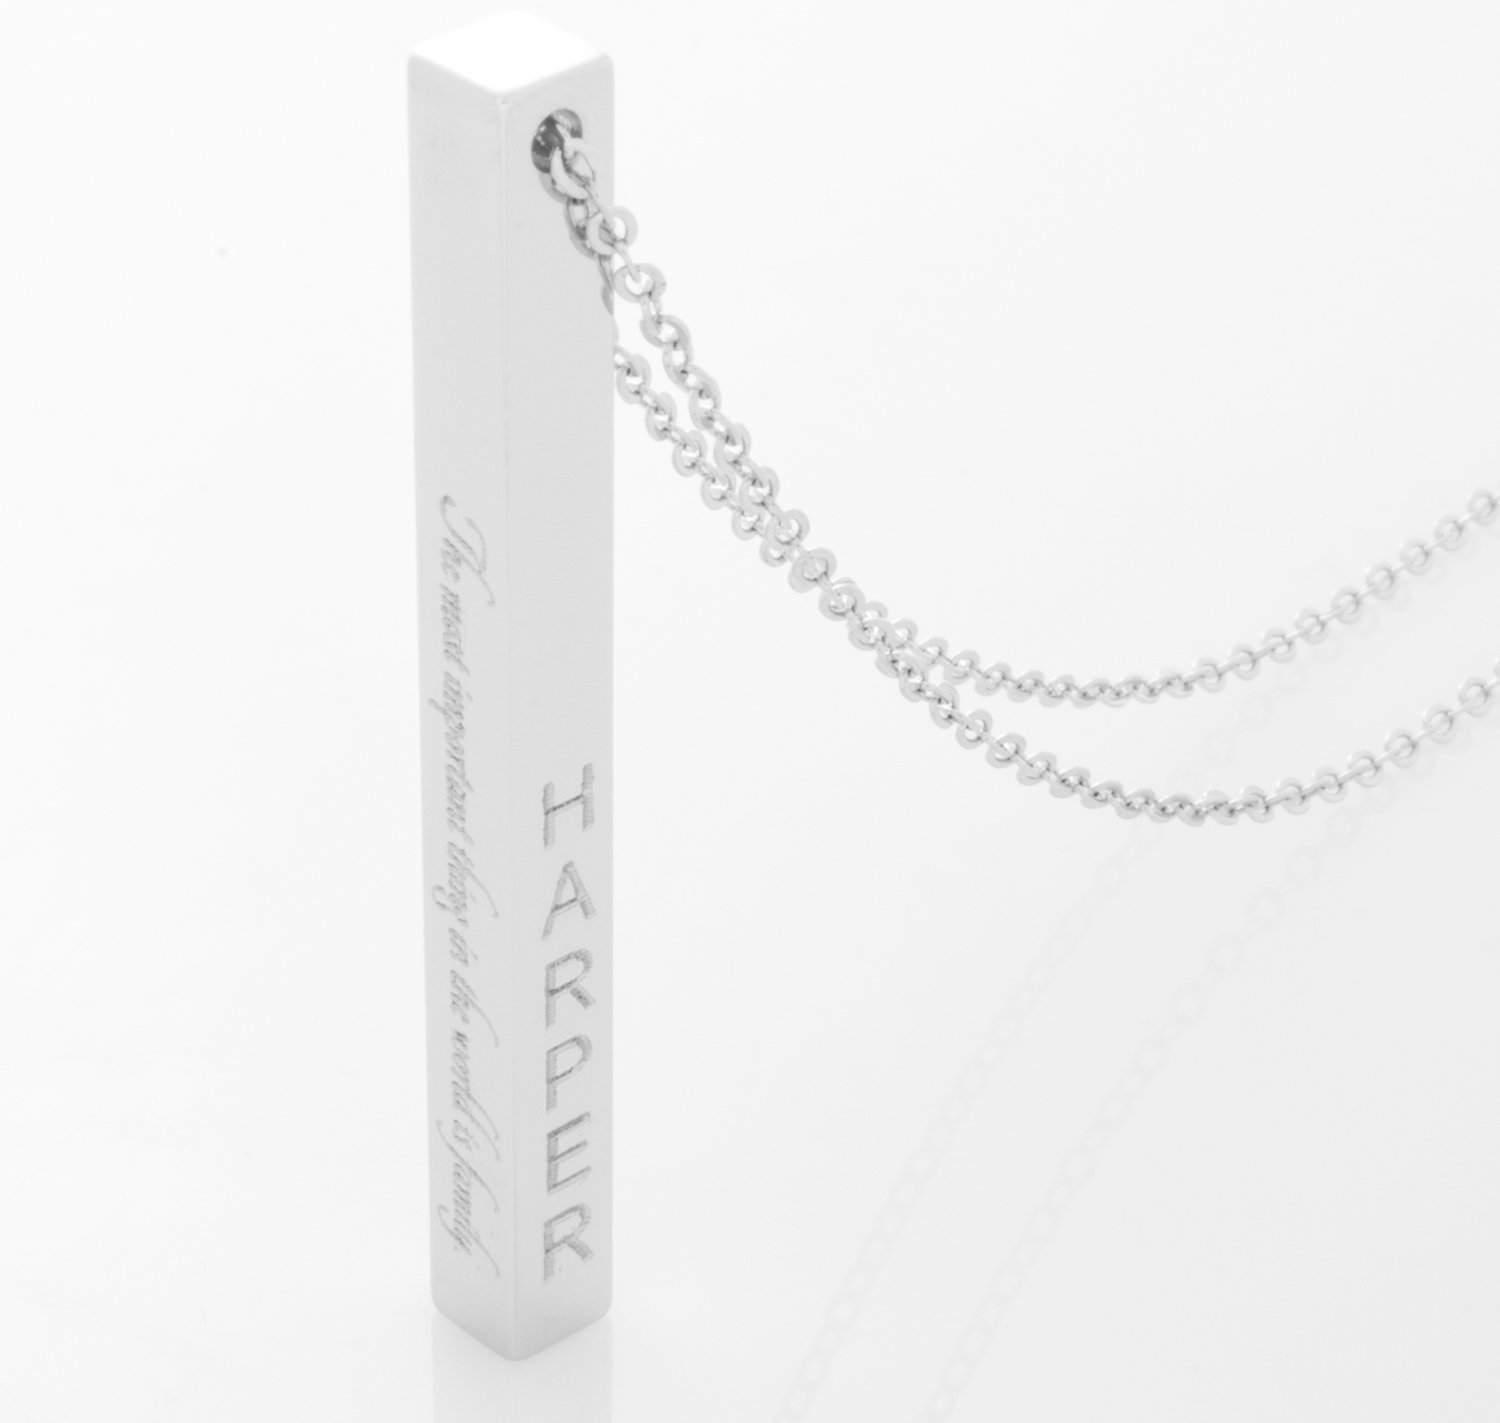 Father's Day Gift - Men's Name Cube Bar Necklace - Personalized Engraved Vertical Pendant - Meaningful and Stylish Jewelry- Perfect Birthday, Christmas, Graduation and Anniversary Gift for Men & Women